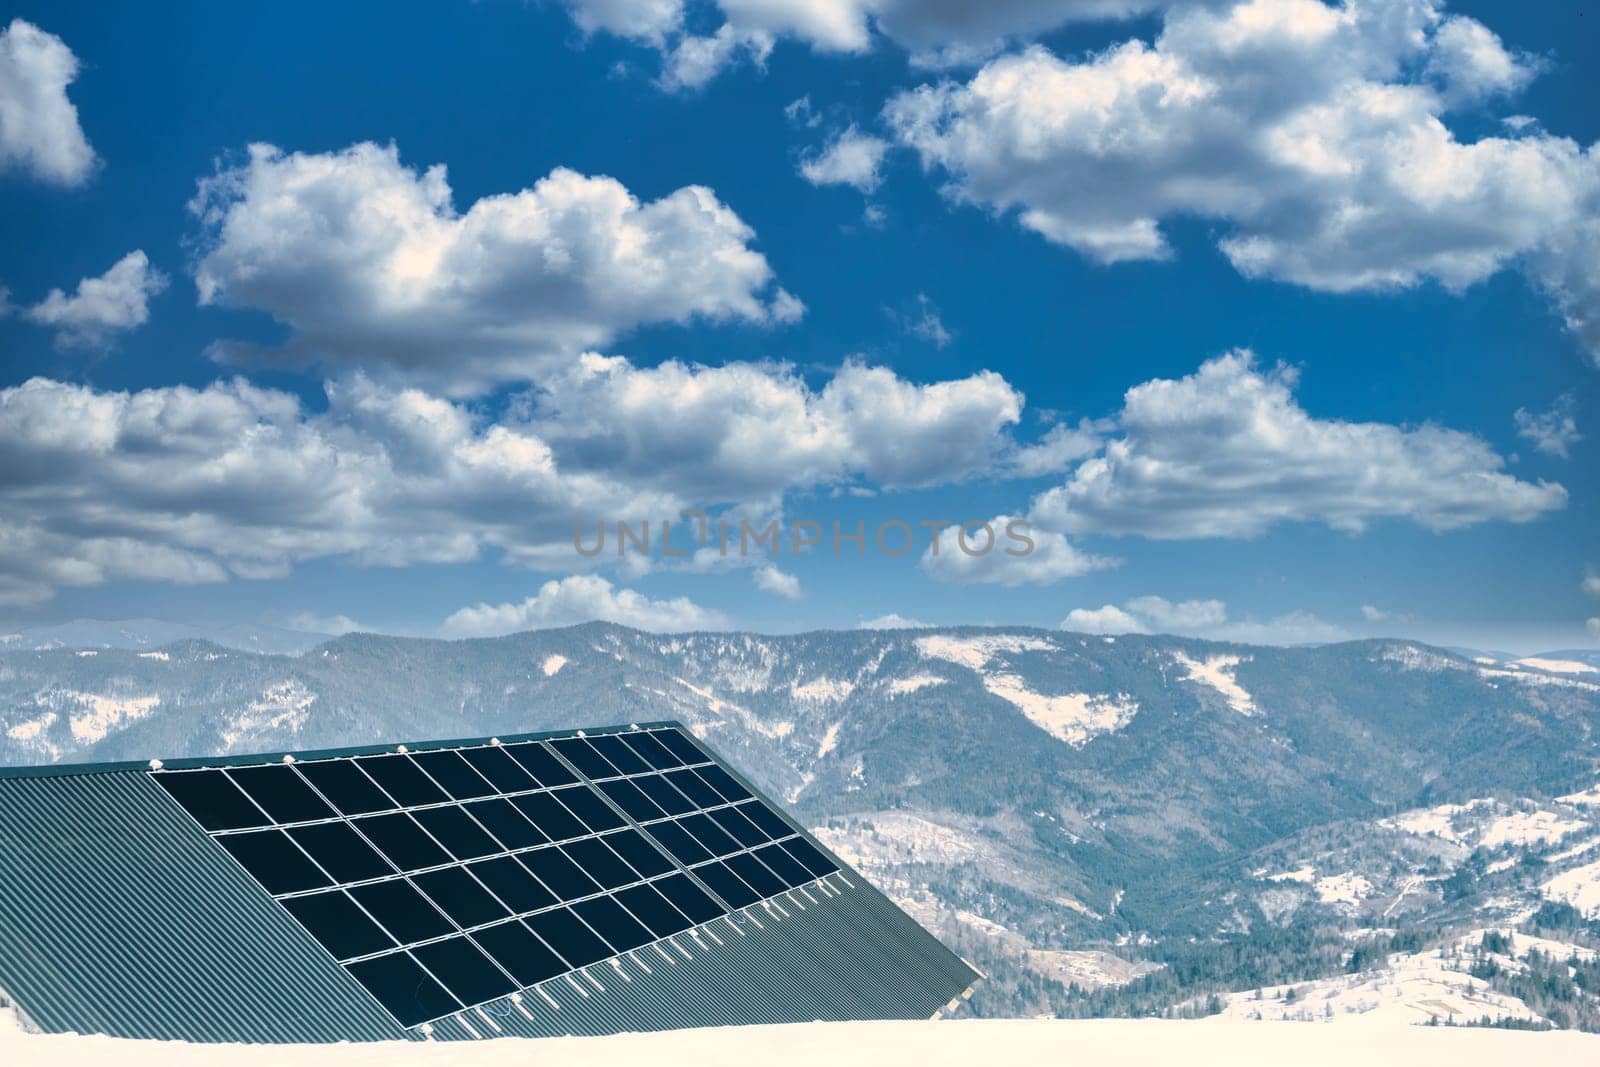 solar panels with the clouds sky. solar panels with sun reflection. background of photovoltaic modules for renewable energy high in mountains. by igor010